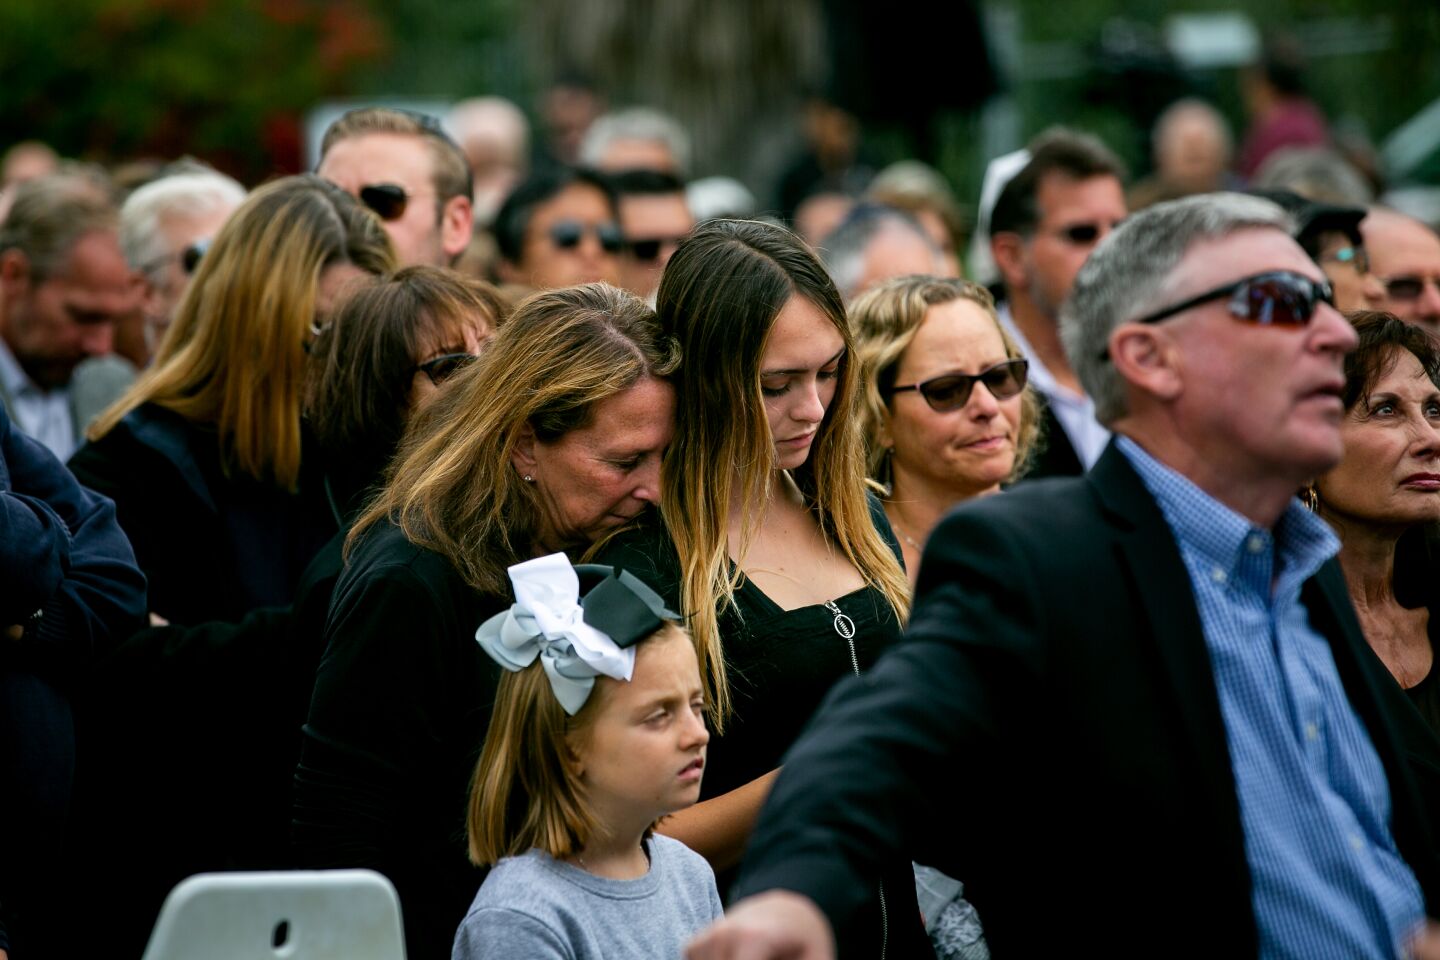 Mourners gather outside of Chabad of Poway for a memorial service for Lori Gilbert Kaye on April 29, 2019 in Poway, California. Kaye was killed on Saturday when a gunman opened fire inside the synagogue.